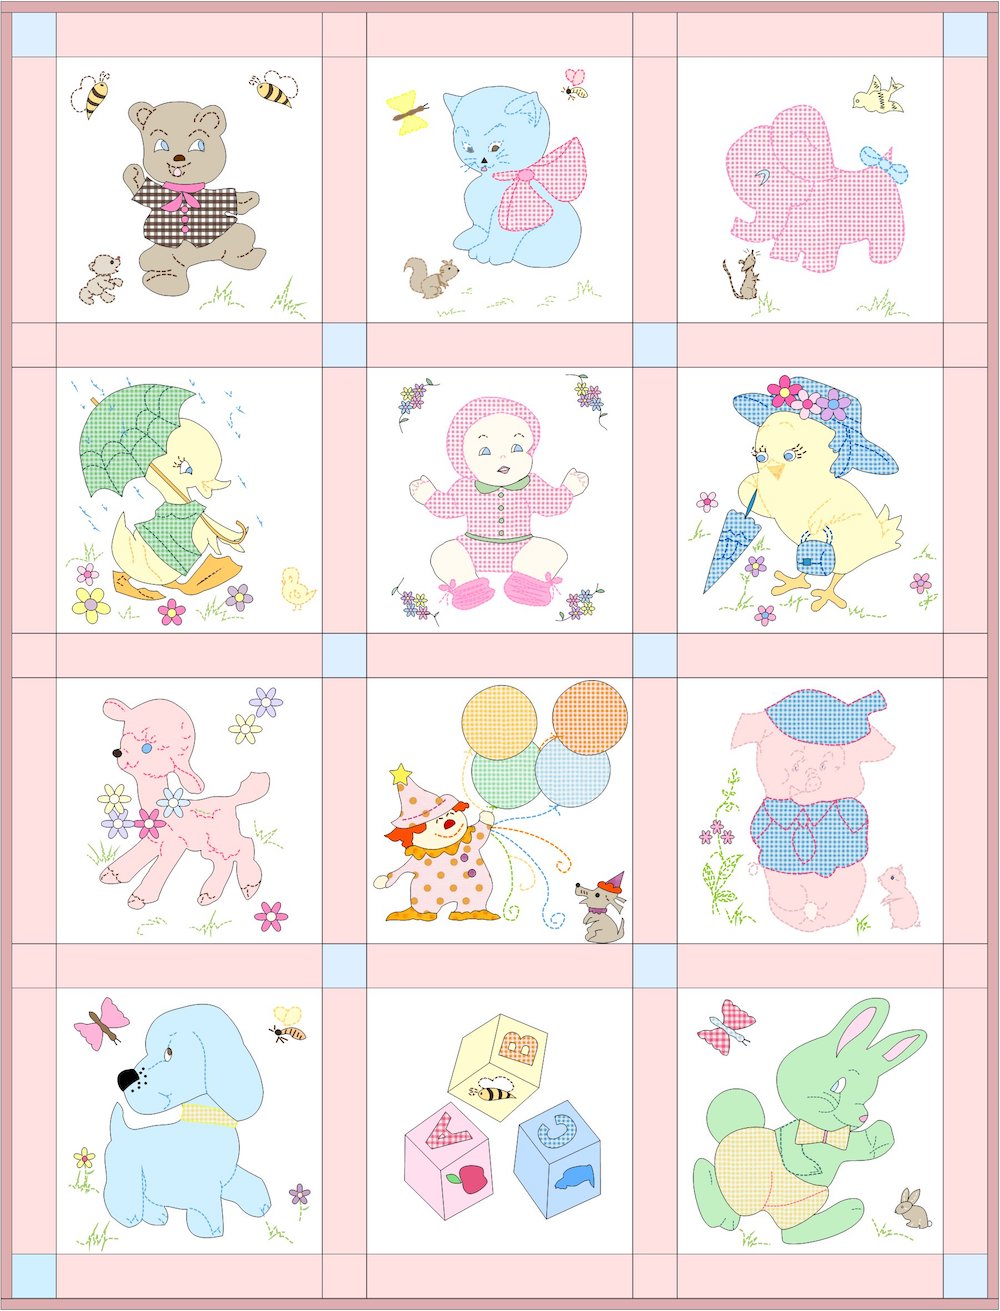 Baby Quilt Embroidery Patterns Vintage Ba Quilt Pattern With 13 Applique And Embroidery Blocks